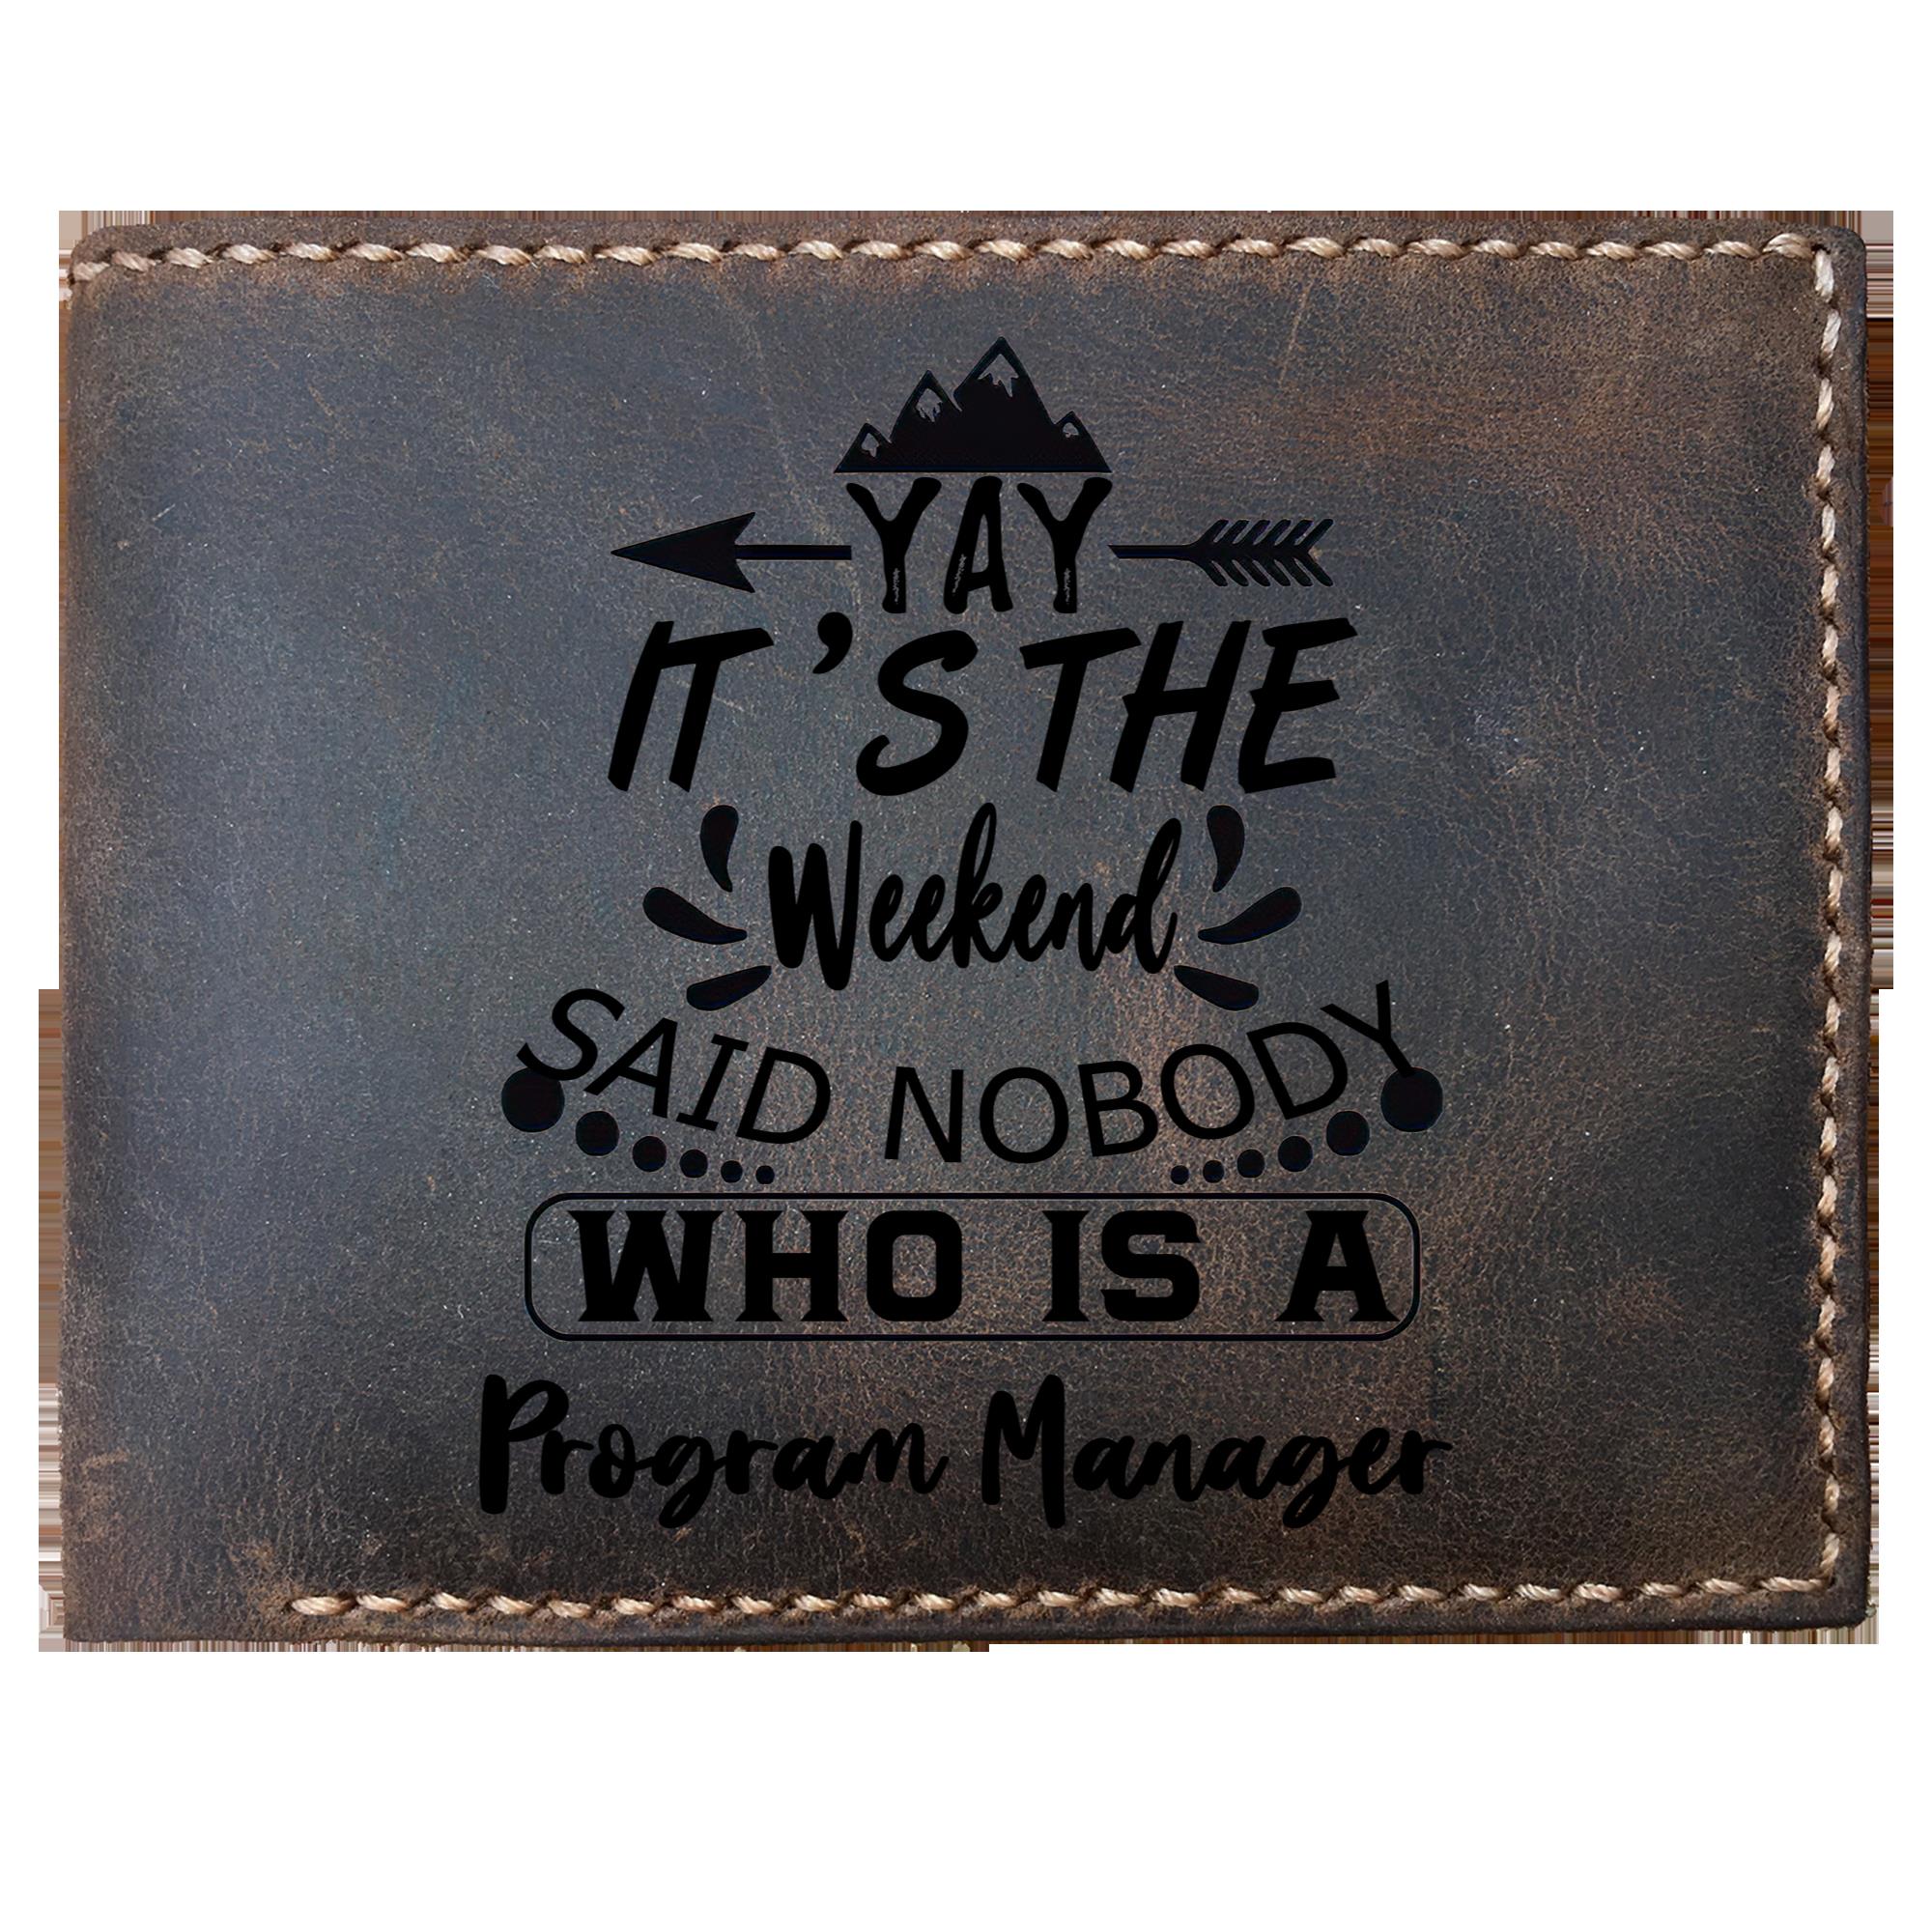 Skitongifts Funny Custom Laser Engraved Bifold Leather Wallet For Men, It's The Weekend Said Nobody Who Is A Program Manager, Father's Day Gifts